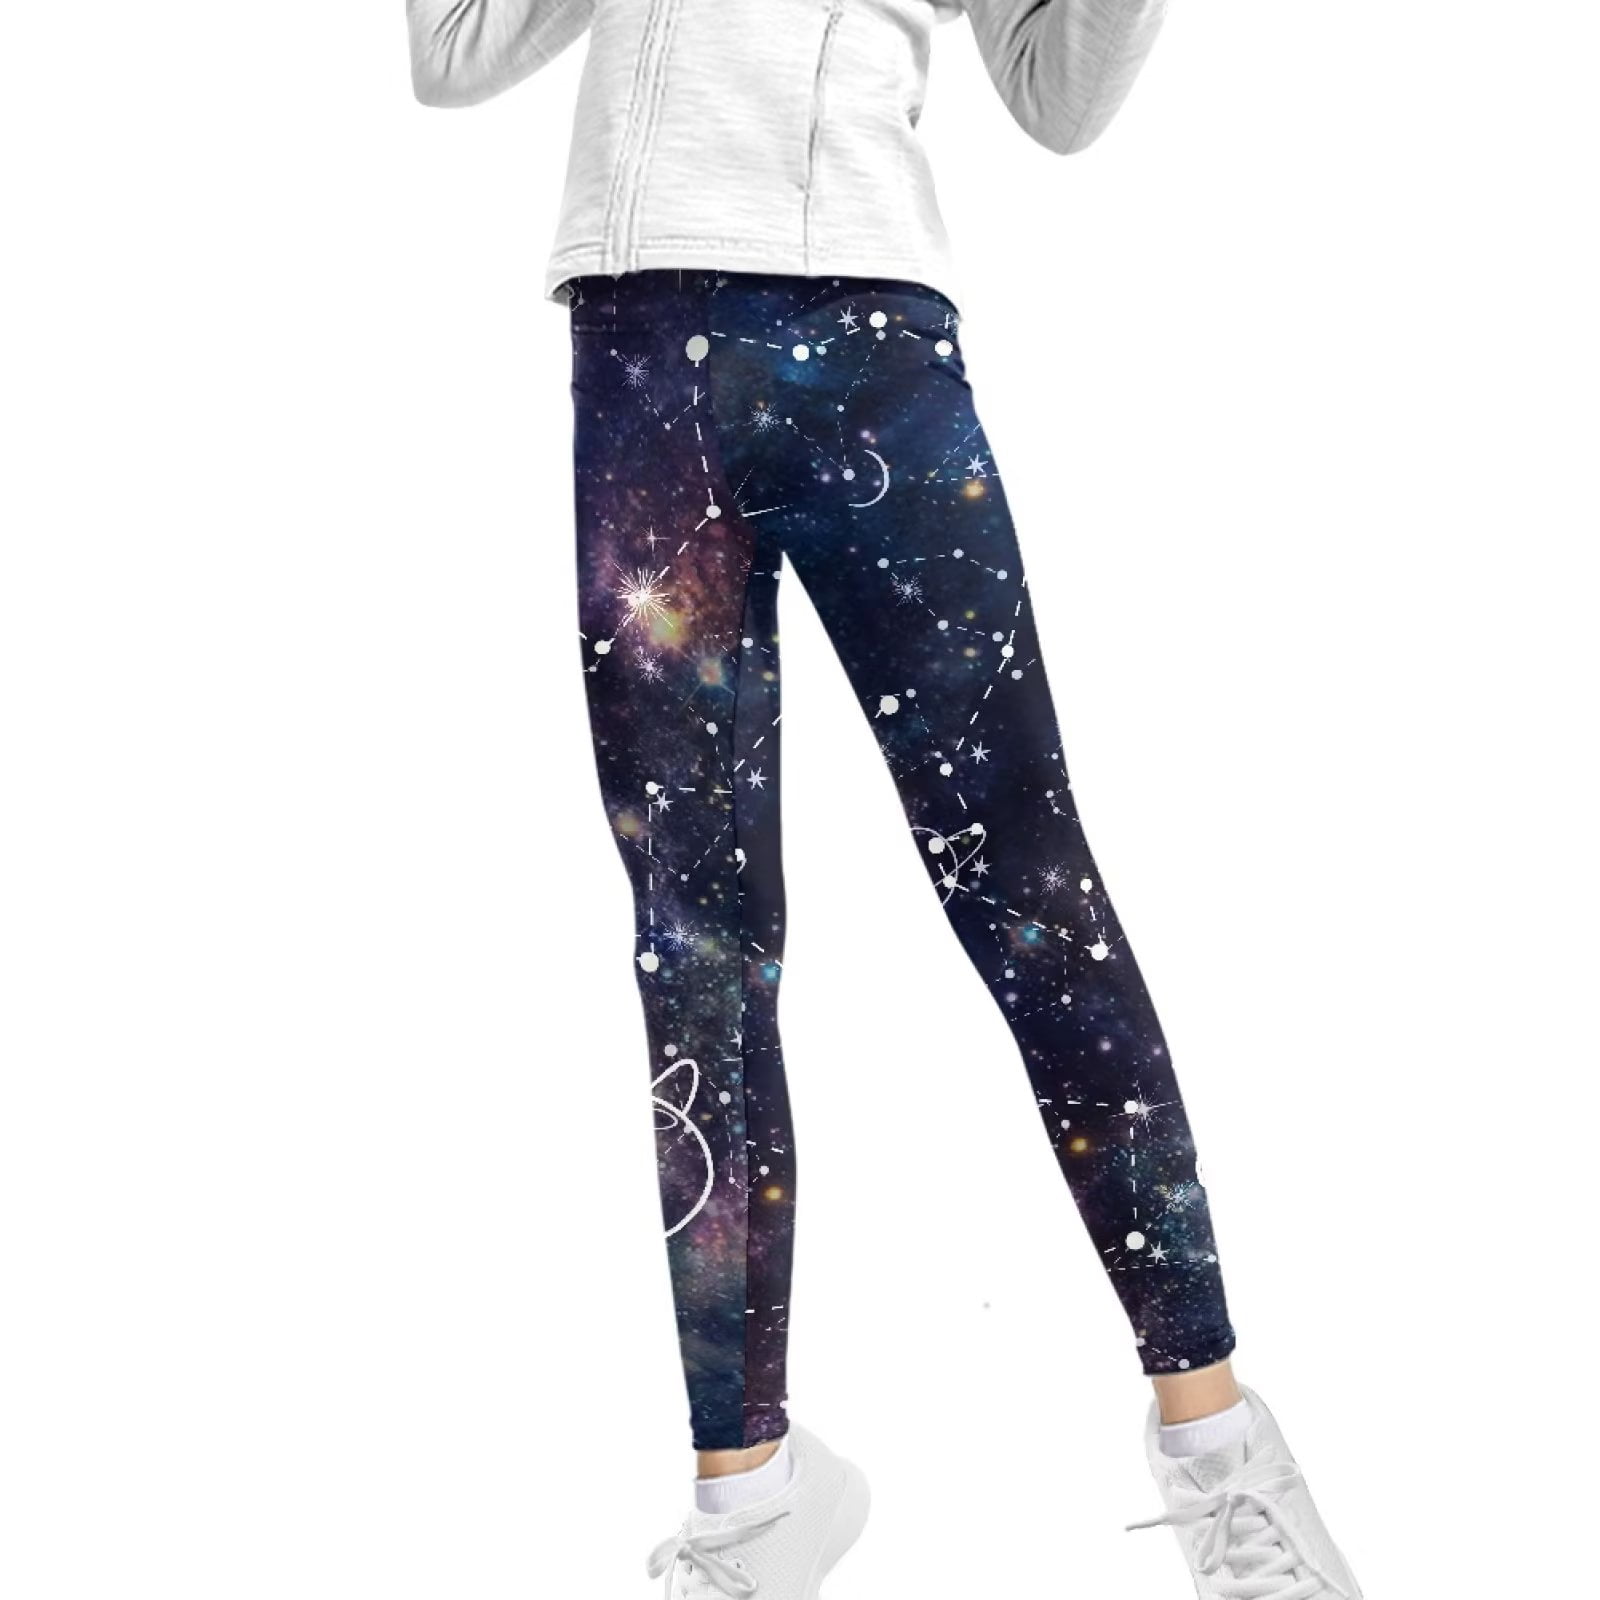 FKELYI Galaxy Space Girls Leggings Size 4-5 Years Comfortable Home Yoga  Pants High Waisted Straight Leg Soft School Teen Kids Tights 